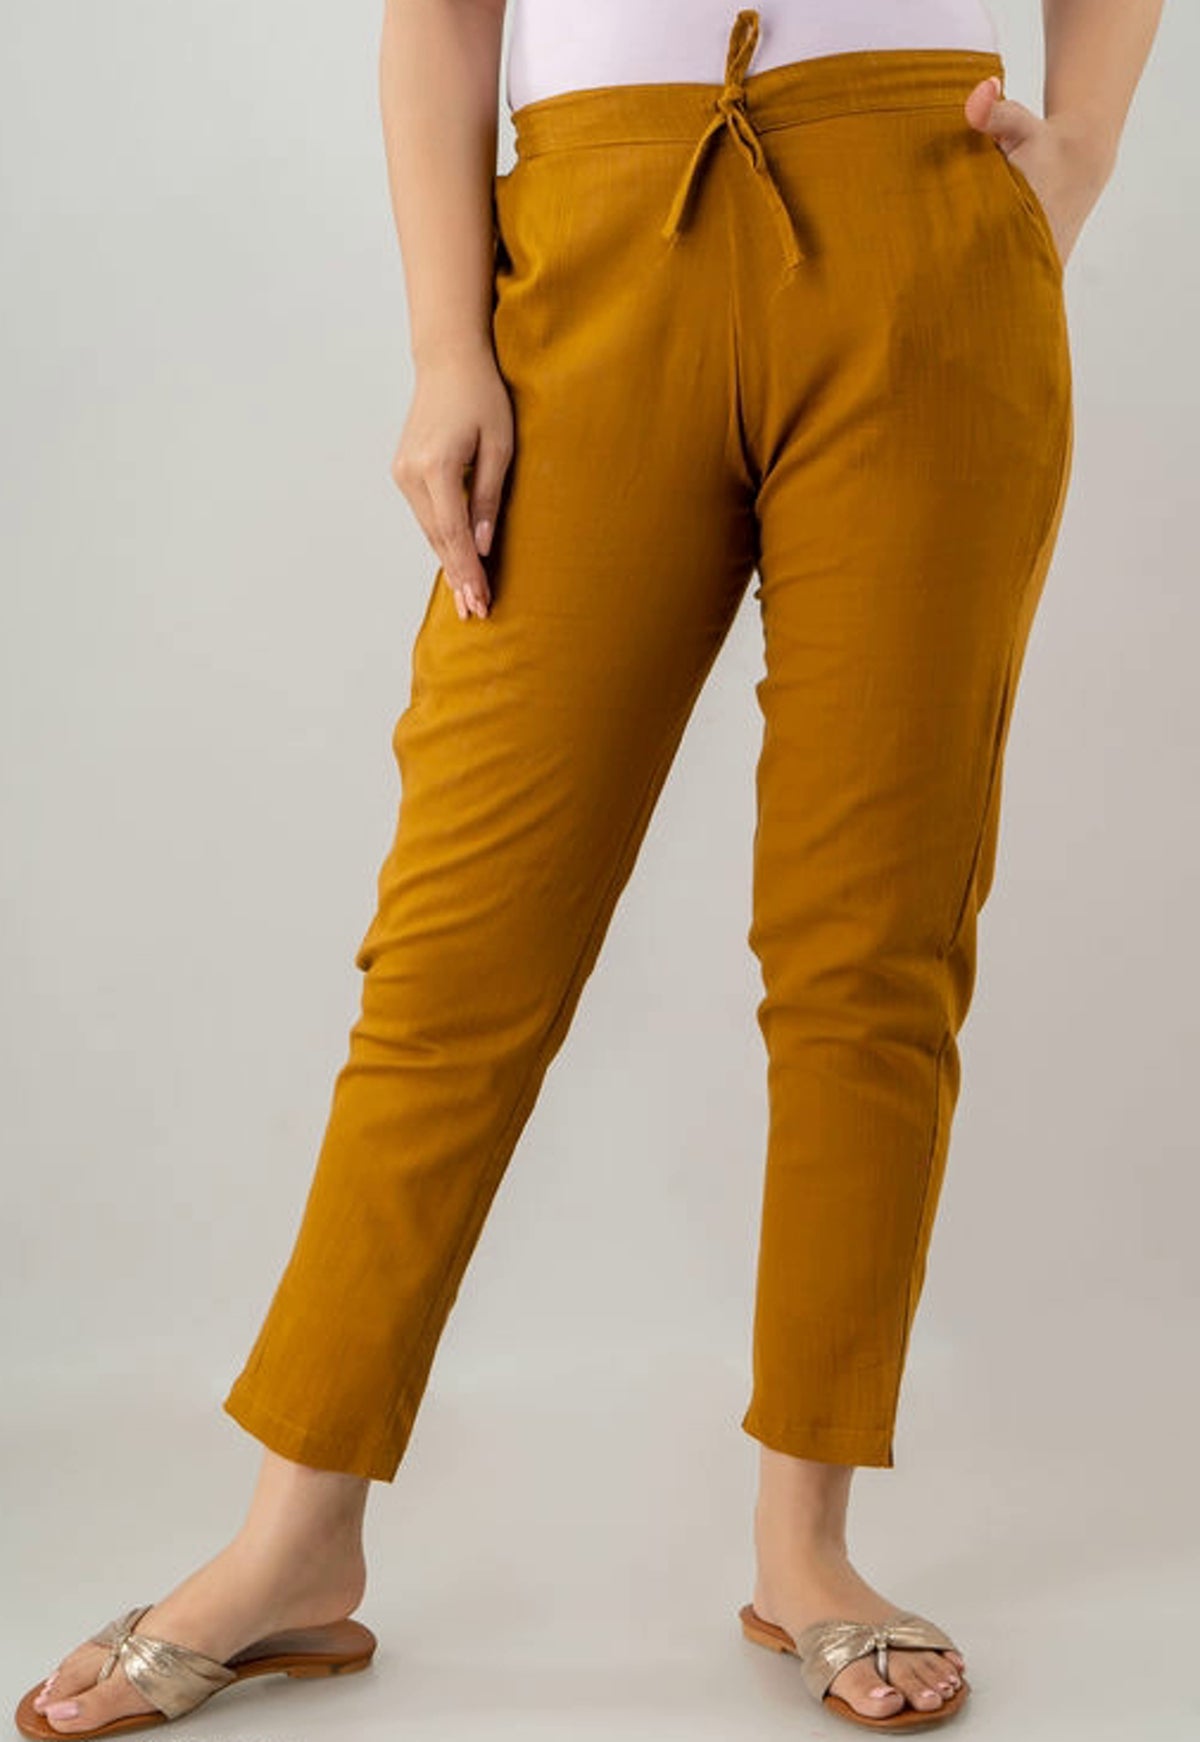 Women's Alluring Black and Mustard Contrast Cotton Lounge Wear